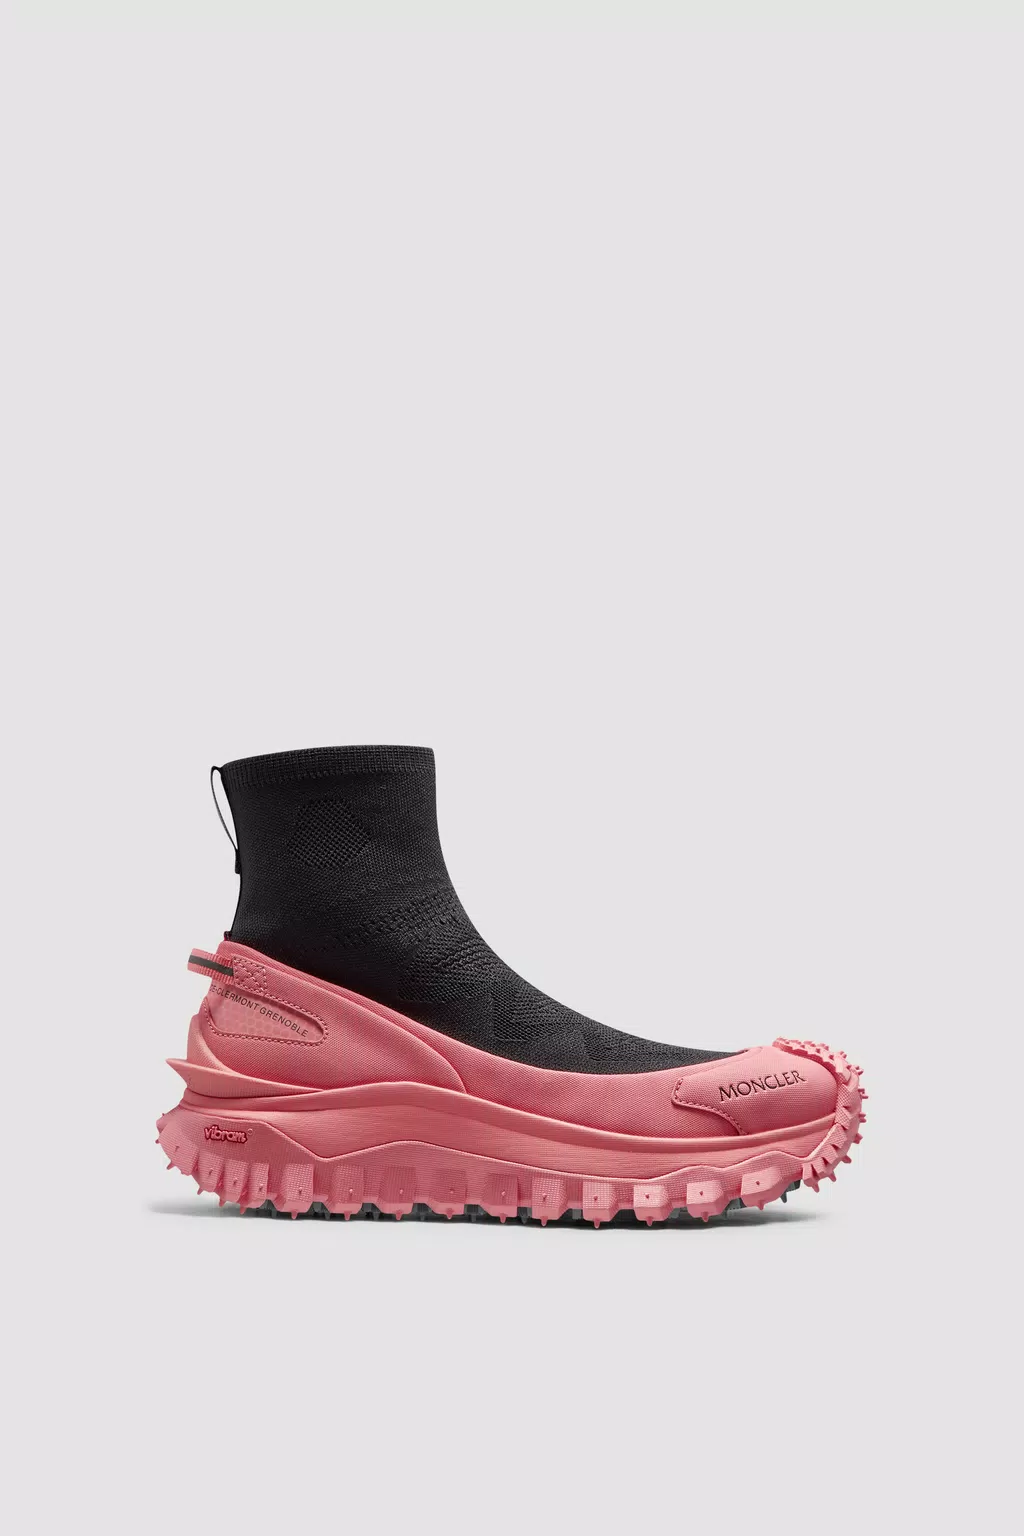 Trailgrip Knit High Top Trainers Women Black & Pink Moncler 1